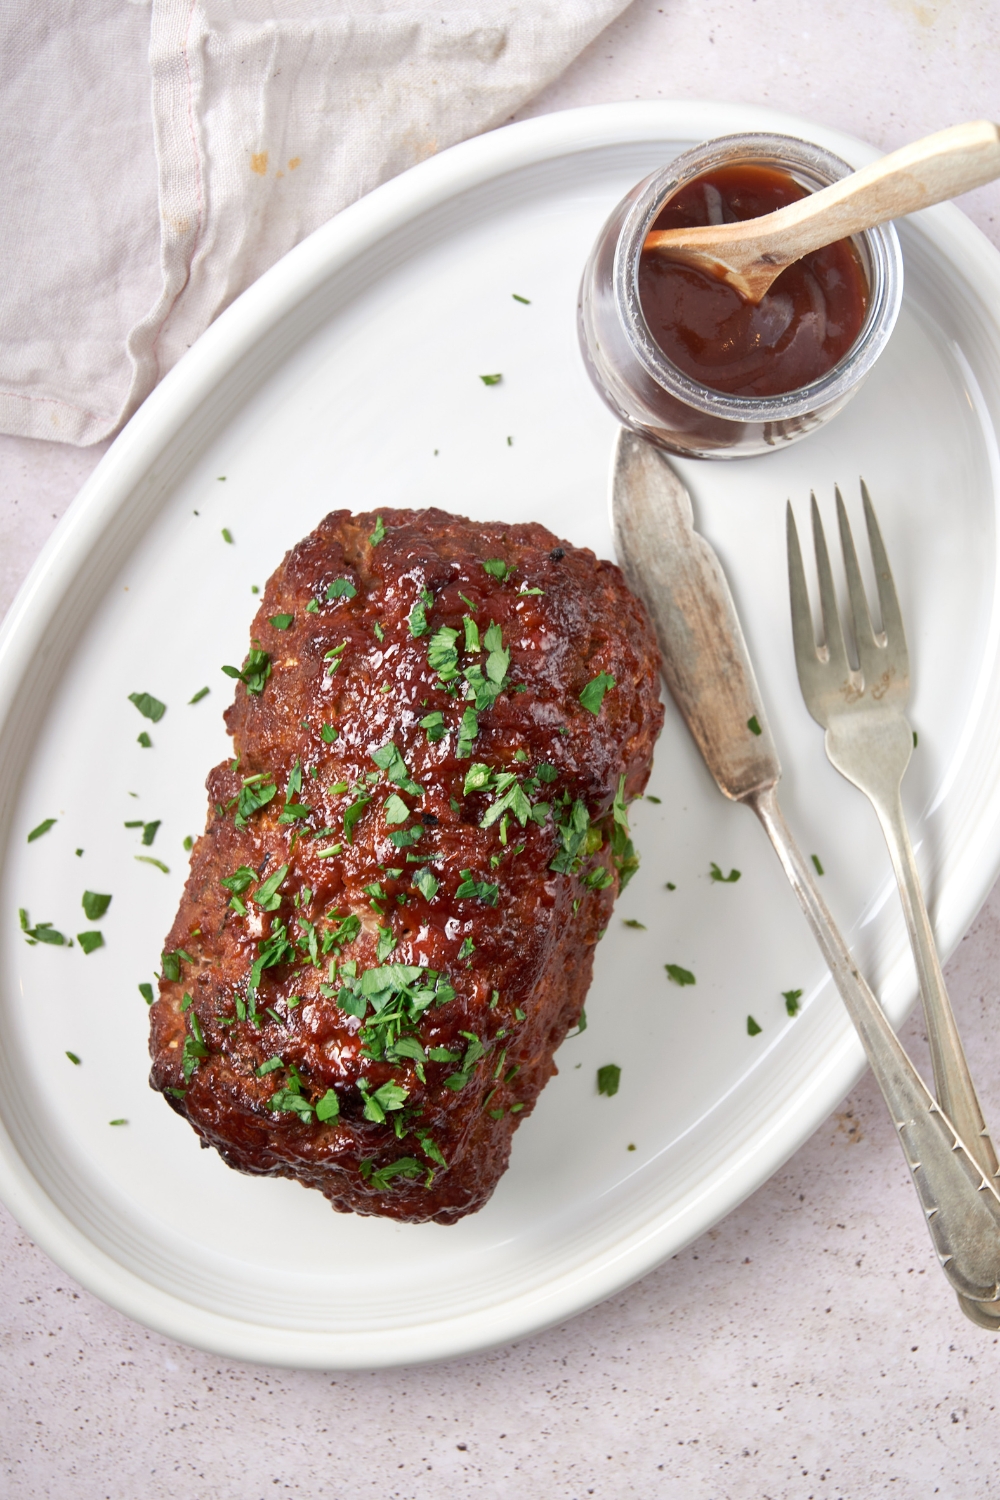 A cooked barbecue meatloaf garnished with parsley on a white serving tray. A knife and fork lay next to it with a glass jar of barbecue sauce with a spoon in it.